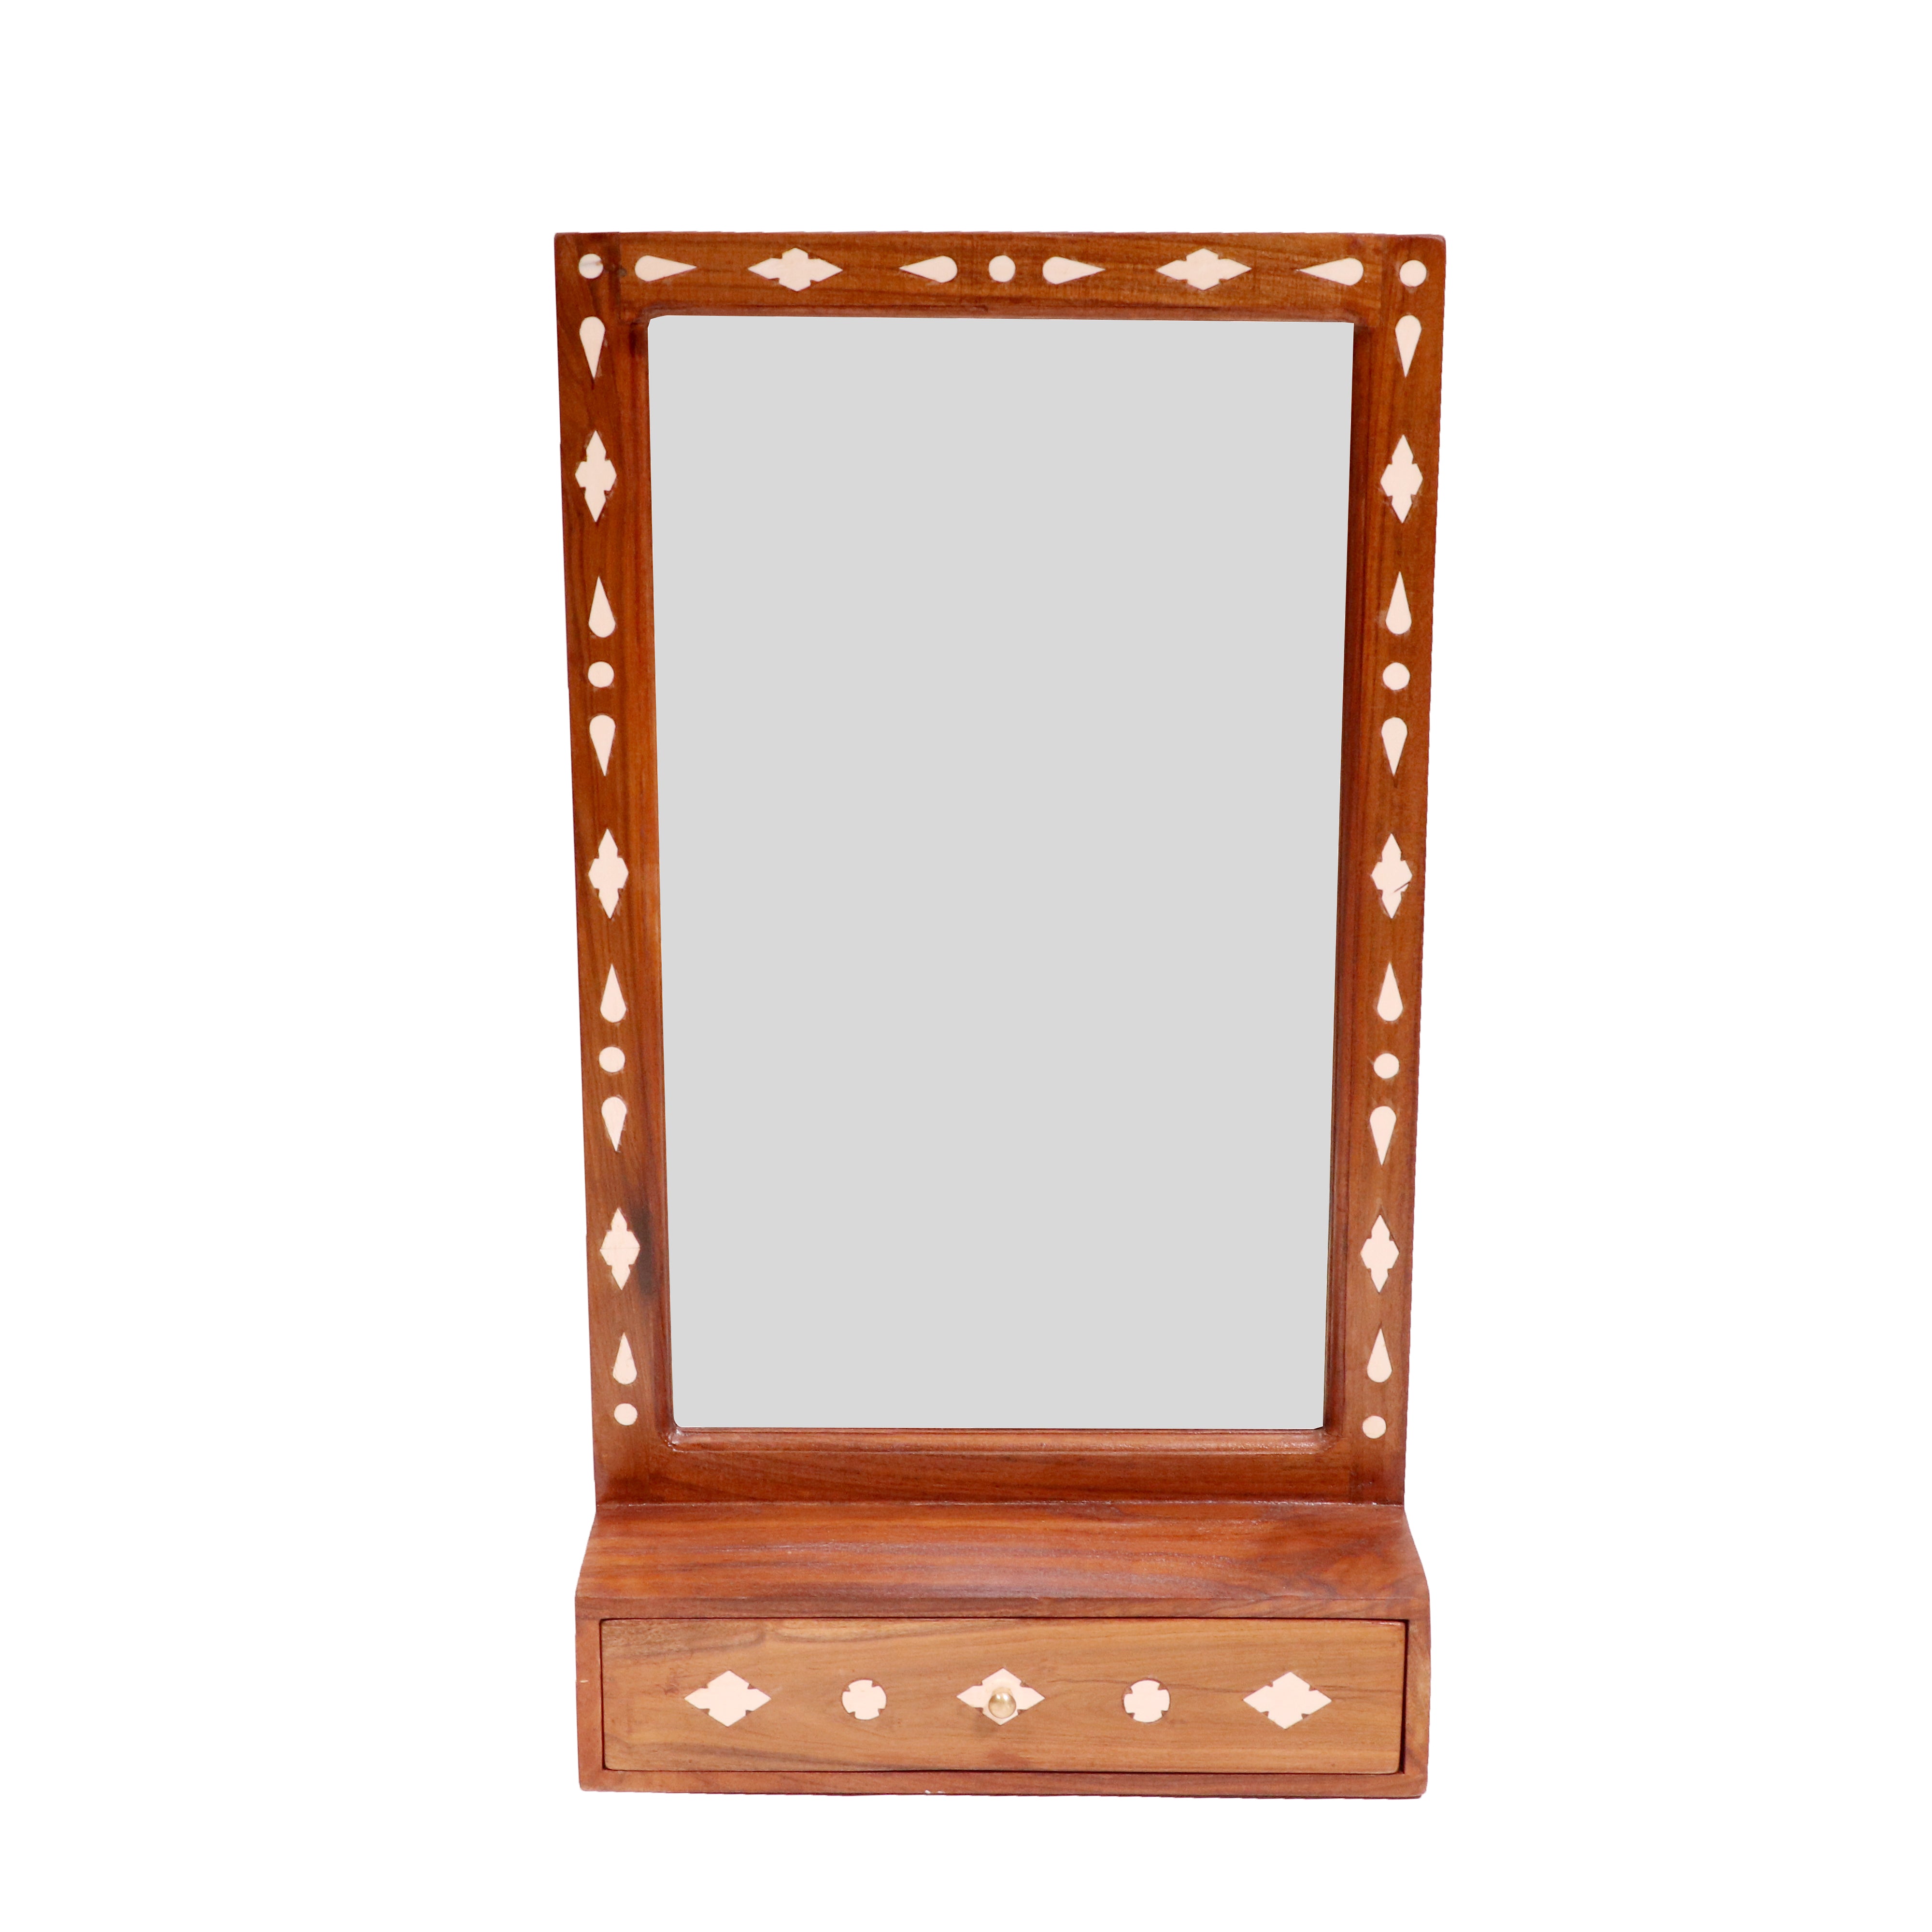 Natural Rustic Inlay Border Designed Wooden Handmade Mirror with Single Drawer Mirror